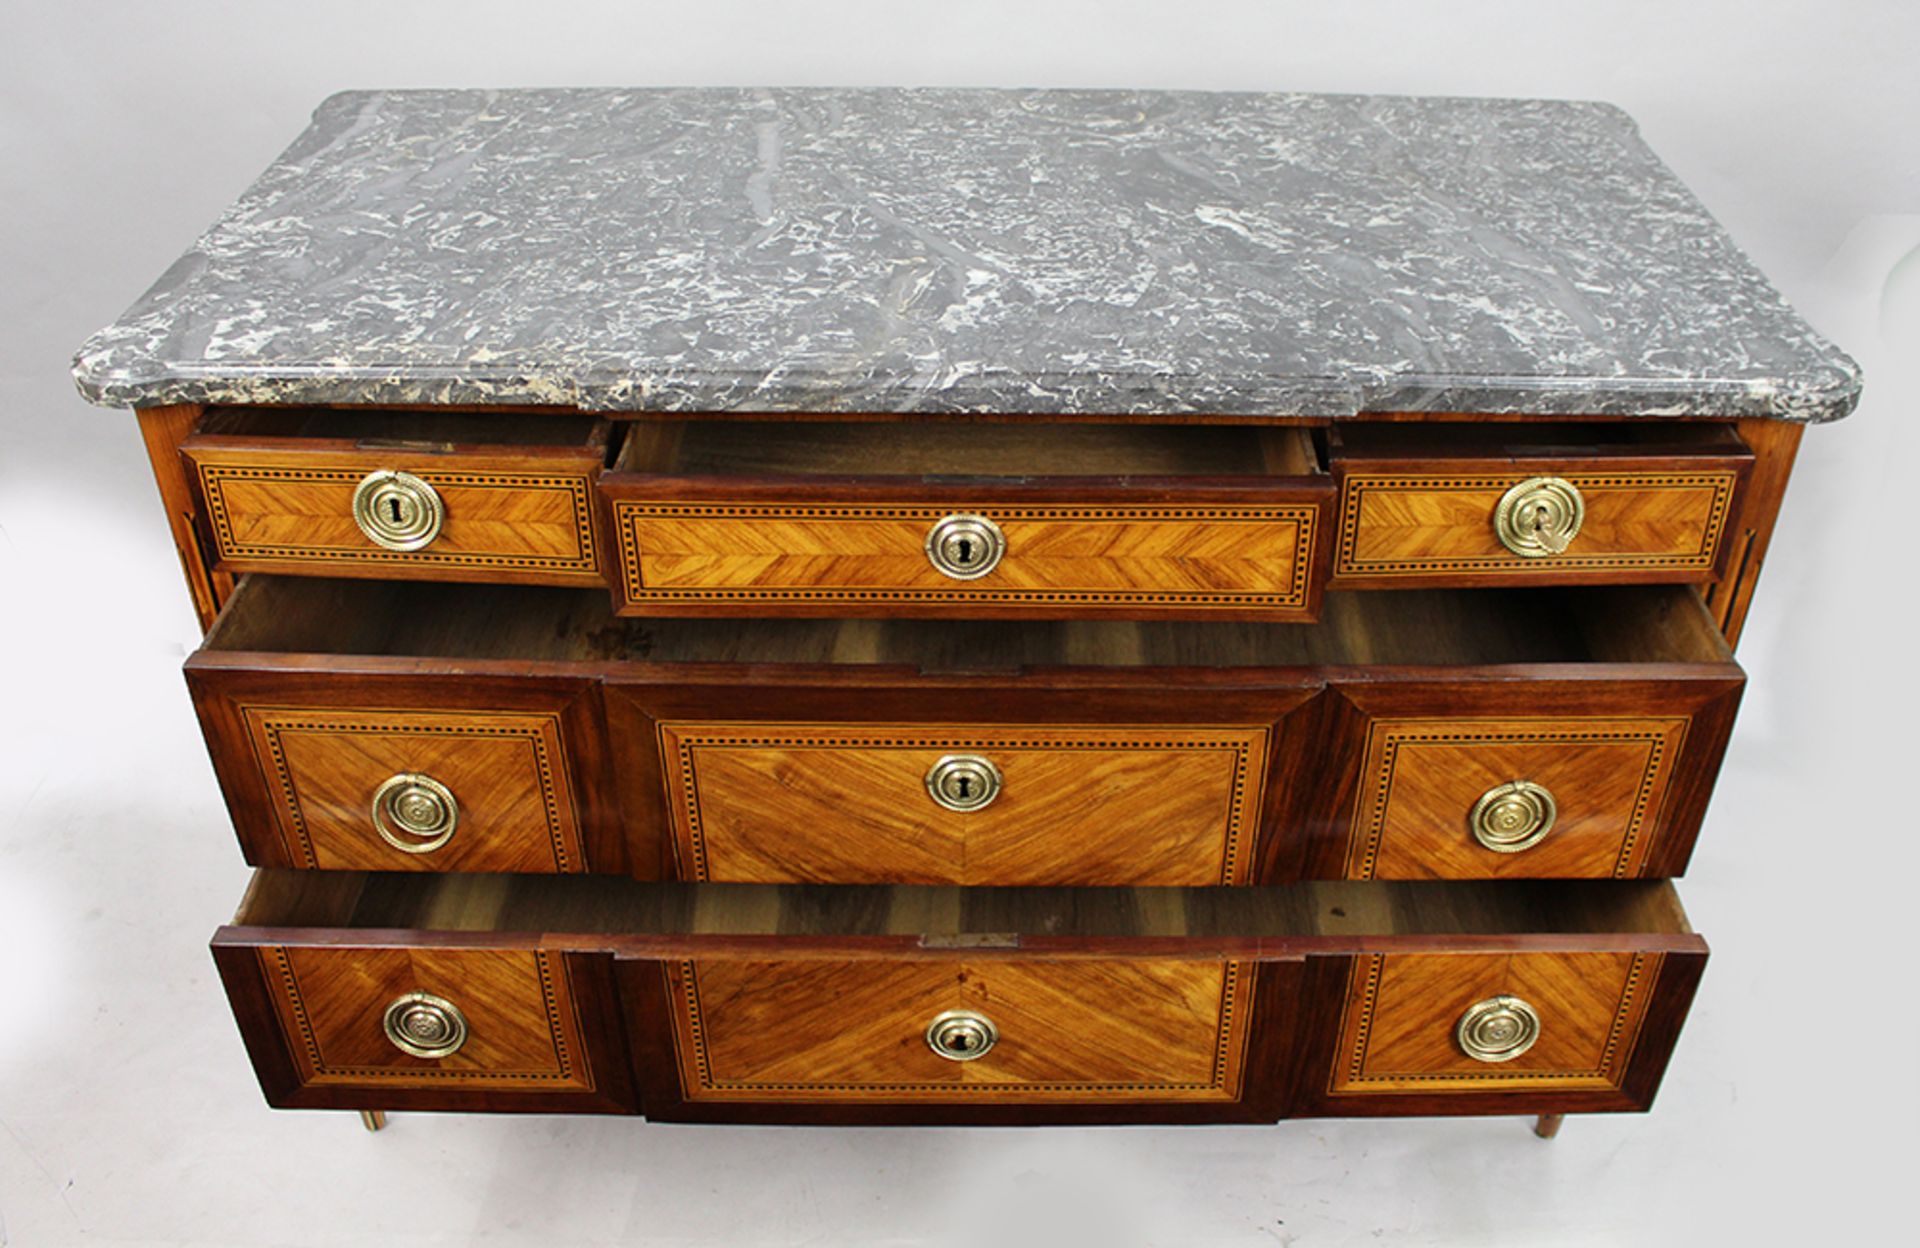 18th c. Inlaid Marble Topped Commode - Image 11 of 14